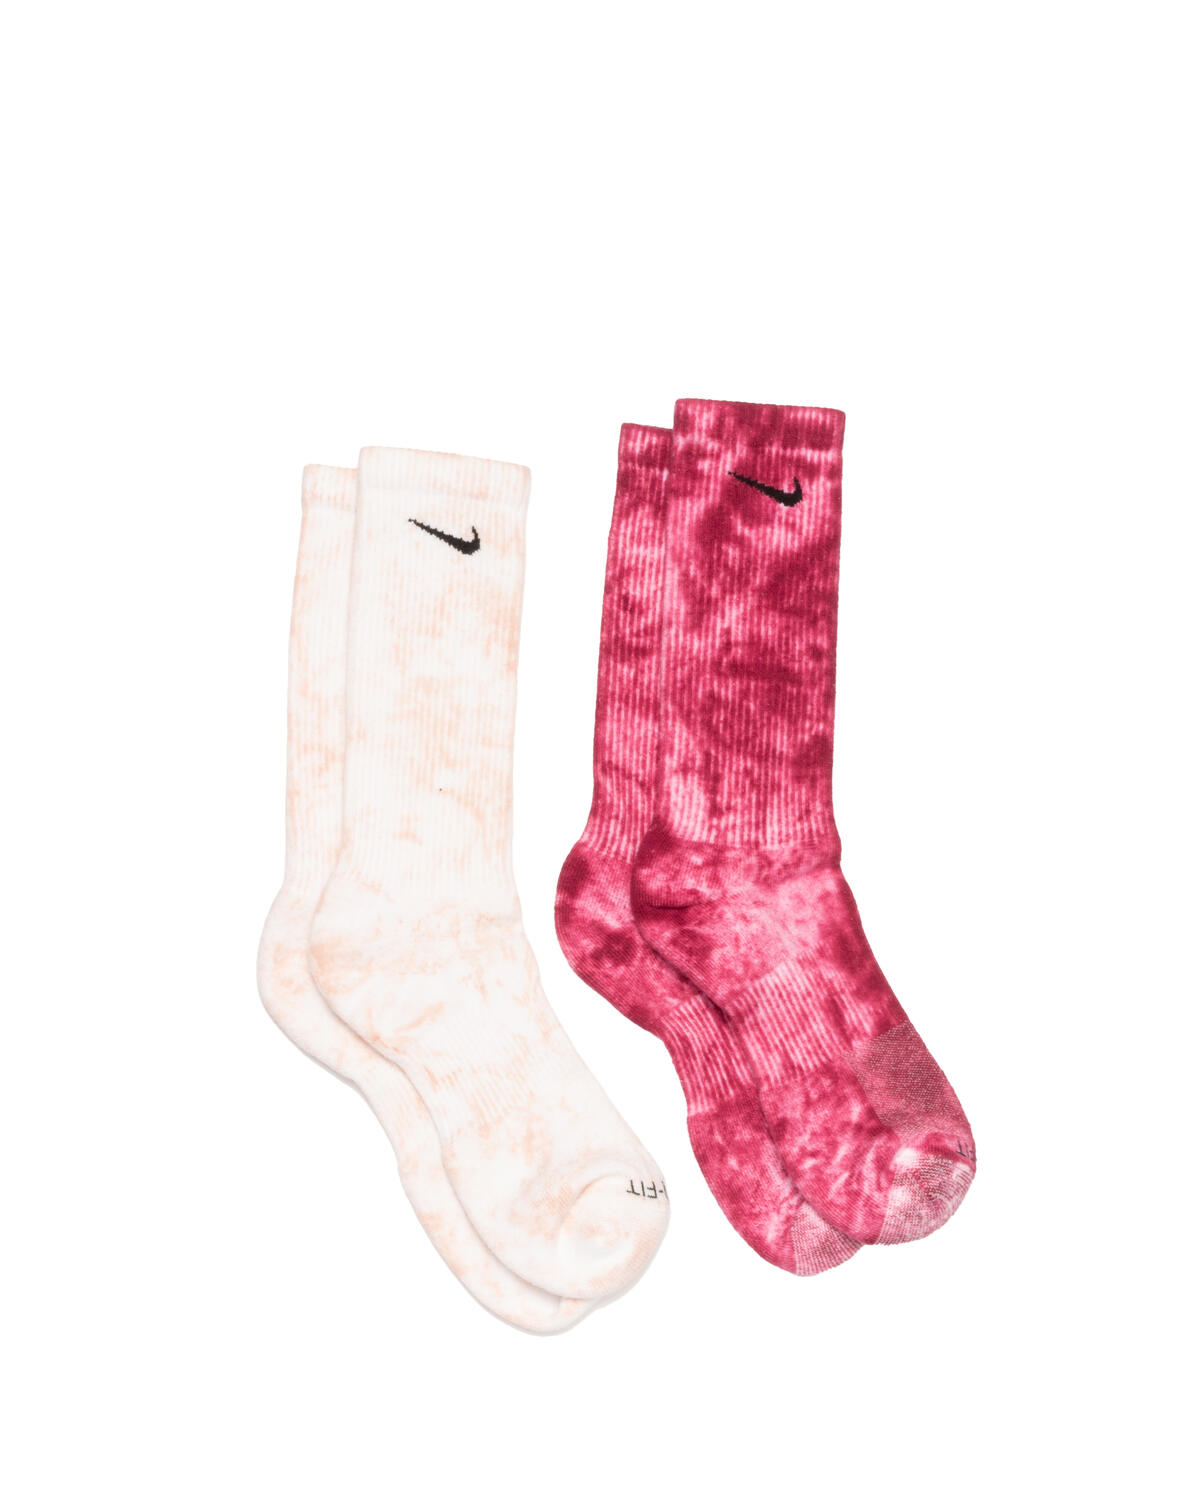 NIKE CHAUSSETTES X3 CREW EVERYDAY PLUS TIE DY ROSE - CHAUSSETTE HOMME